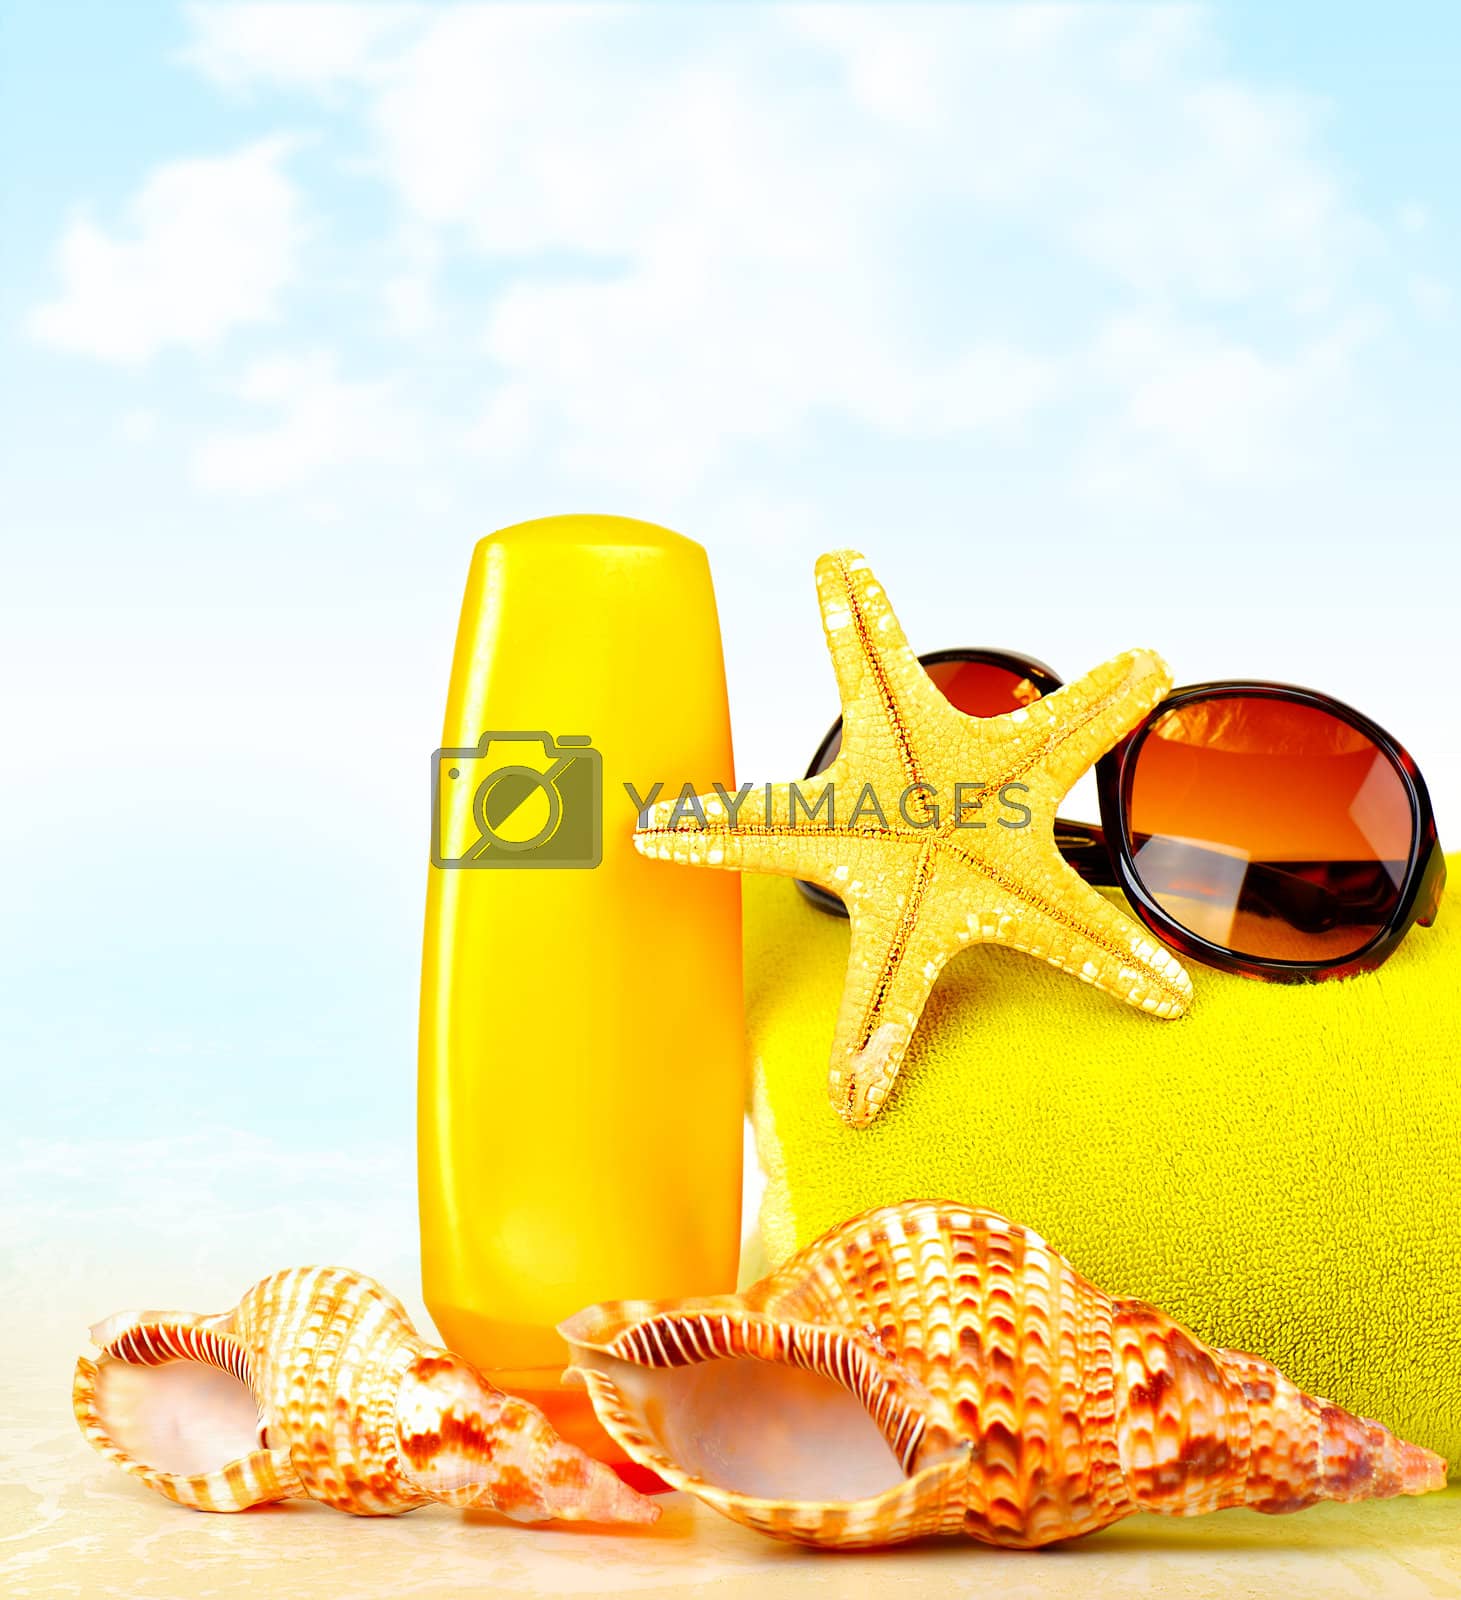 Royalty free image of Summertime holidays background by Anna_Omelchenko